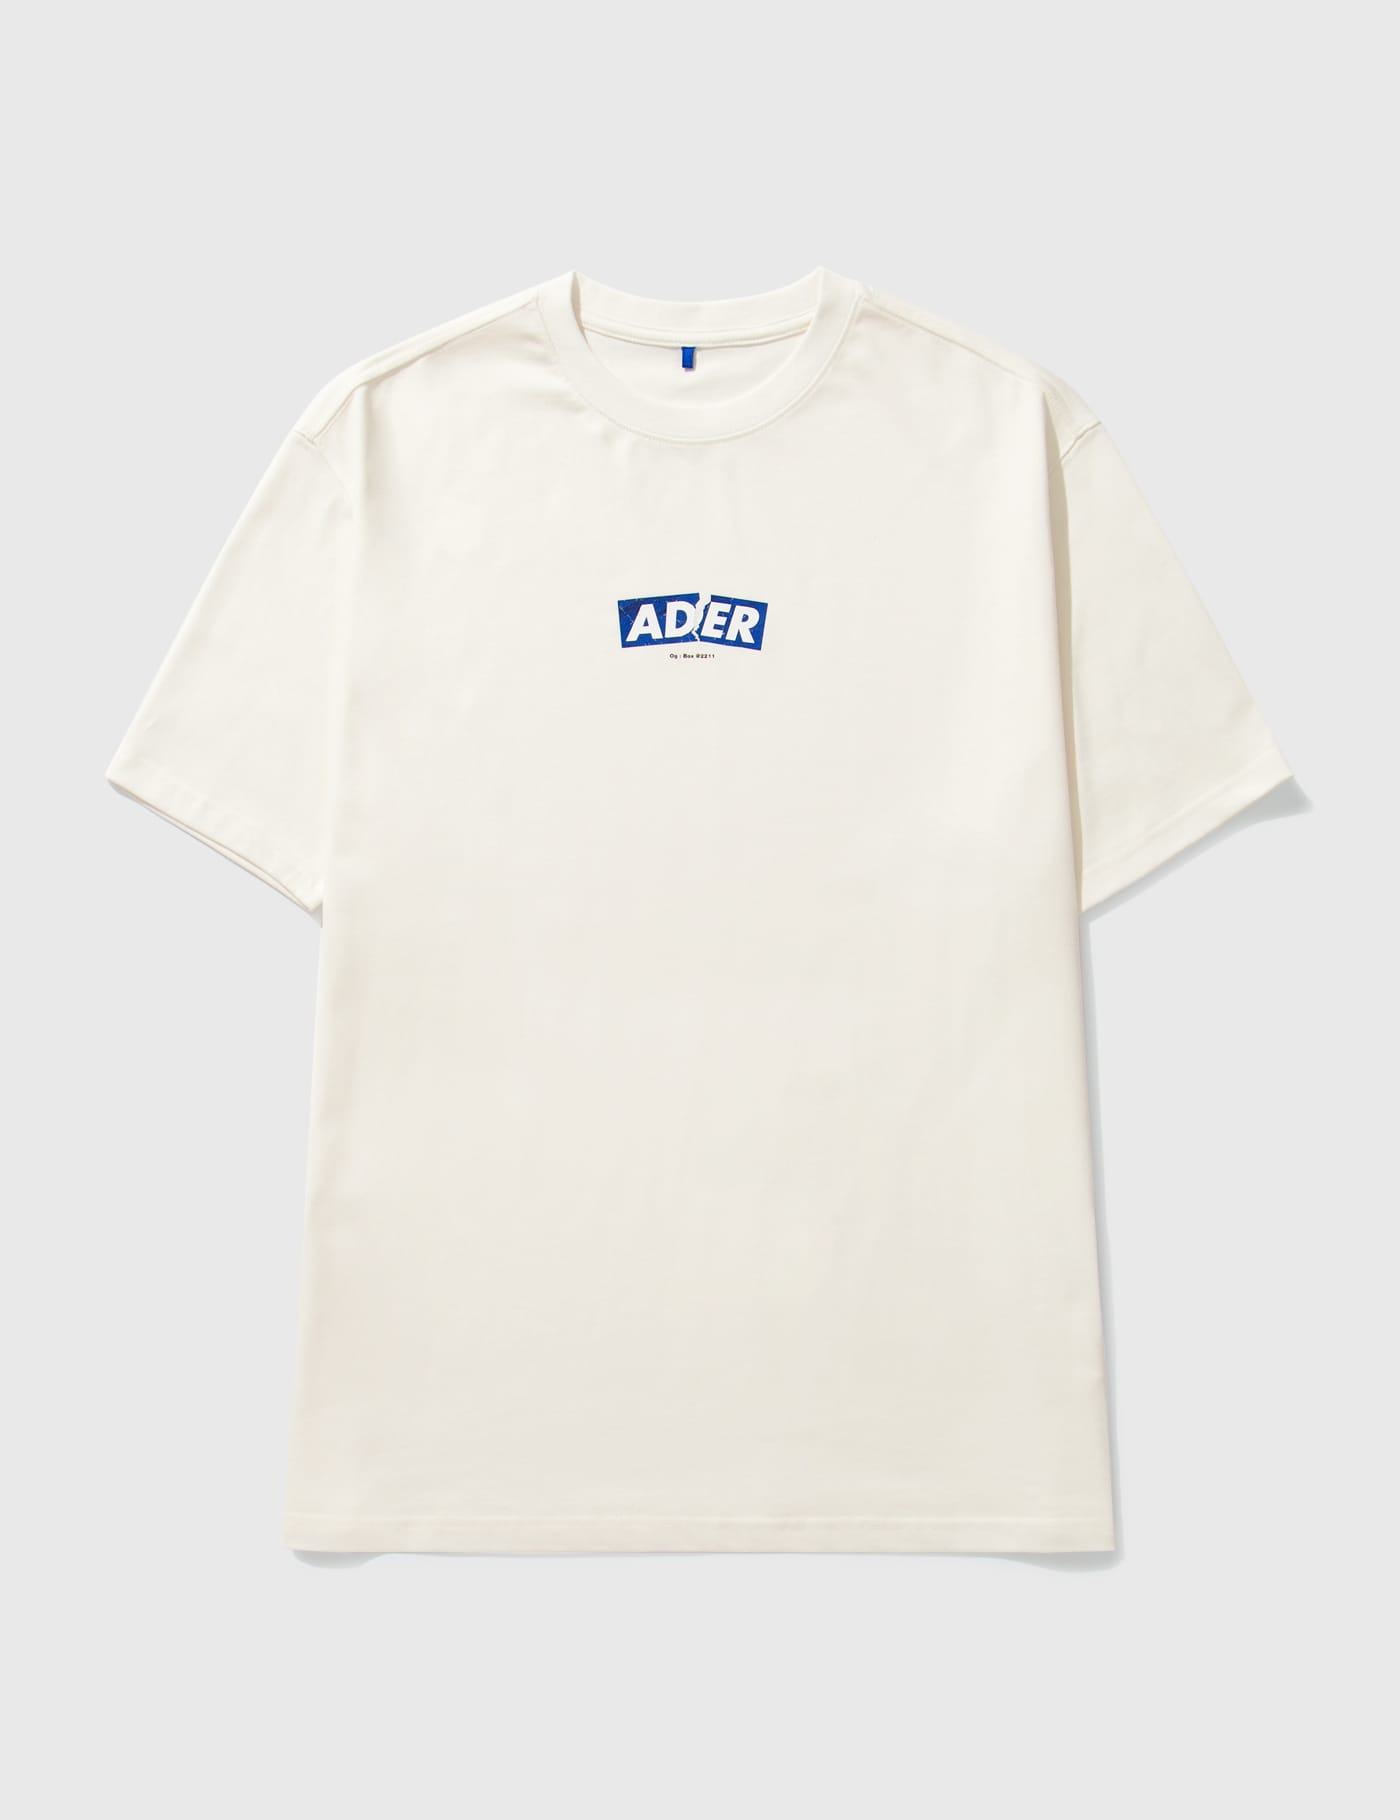 Ader Error - OG Box Logo T-shirt | HBX - Globally Curated Fashion and  Lifestyle by Hypebeast